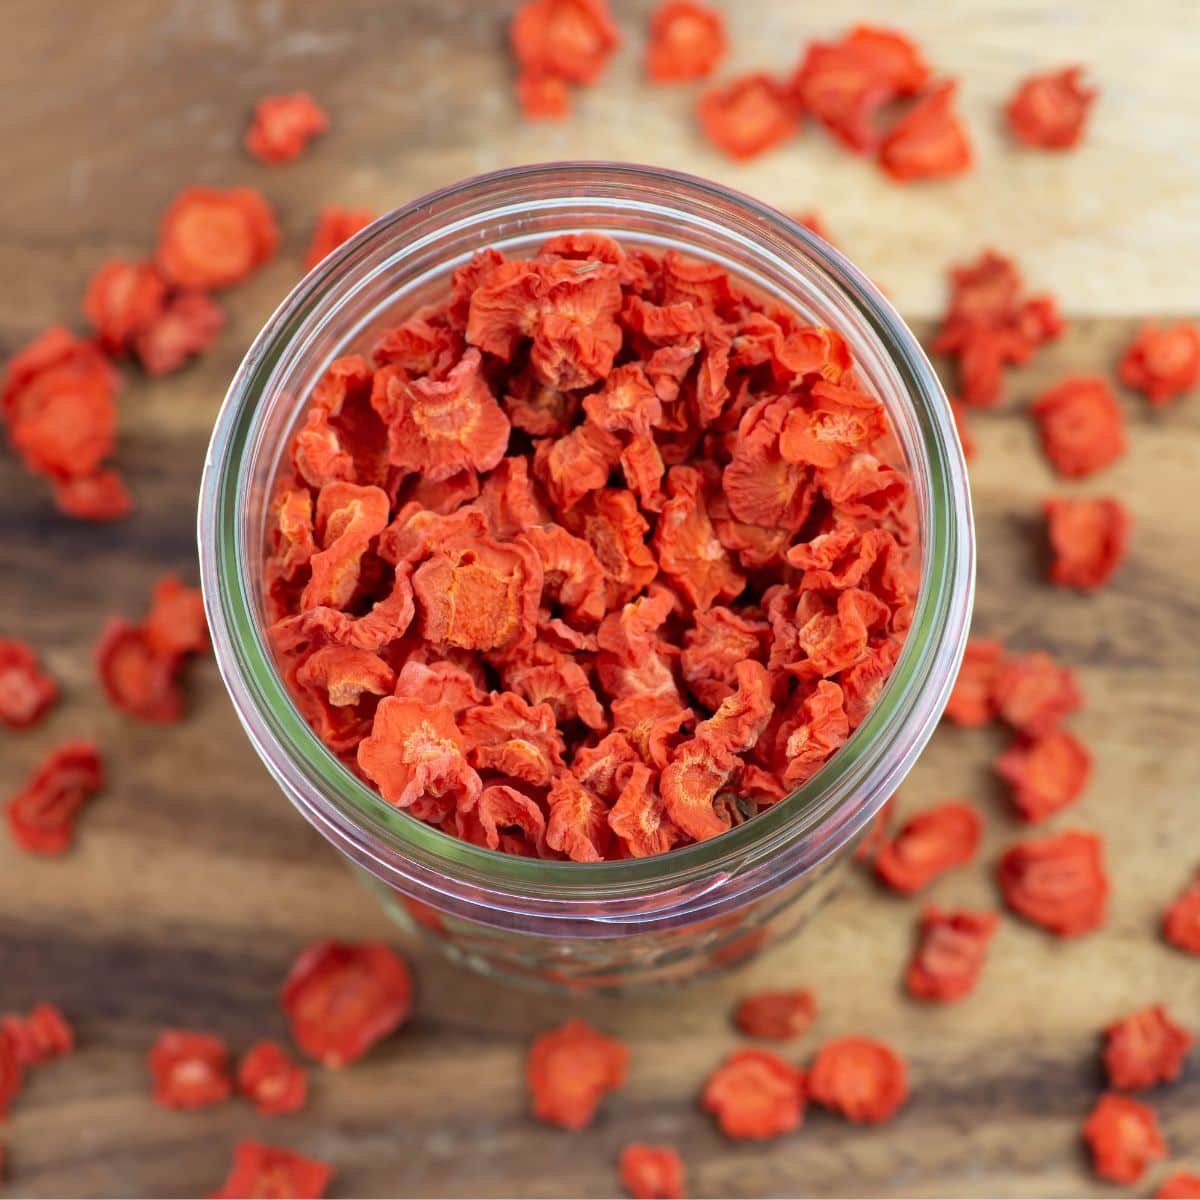 Overhead image of dehydrated carrots in a glass mason jar with some scattered on a cutting board.